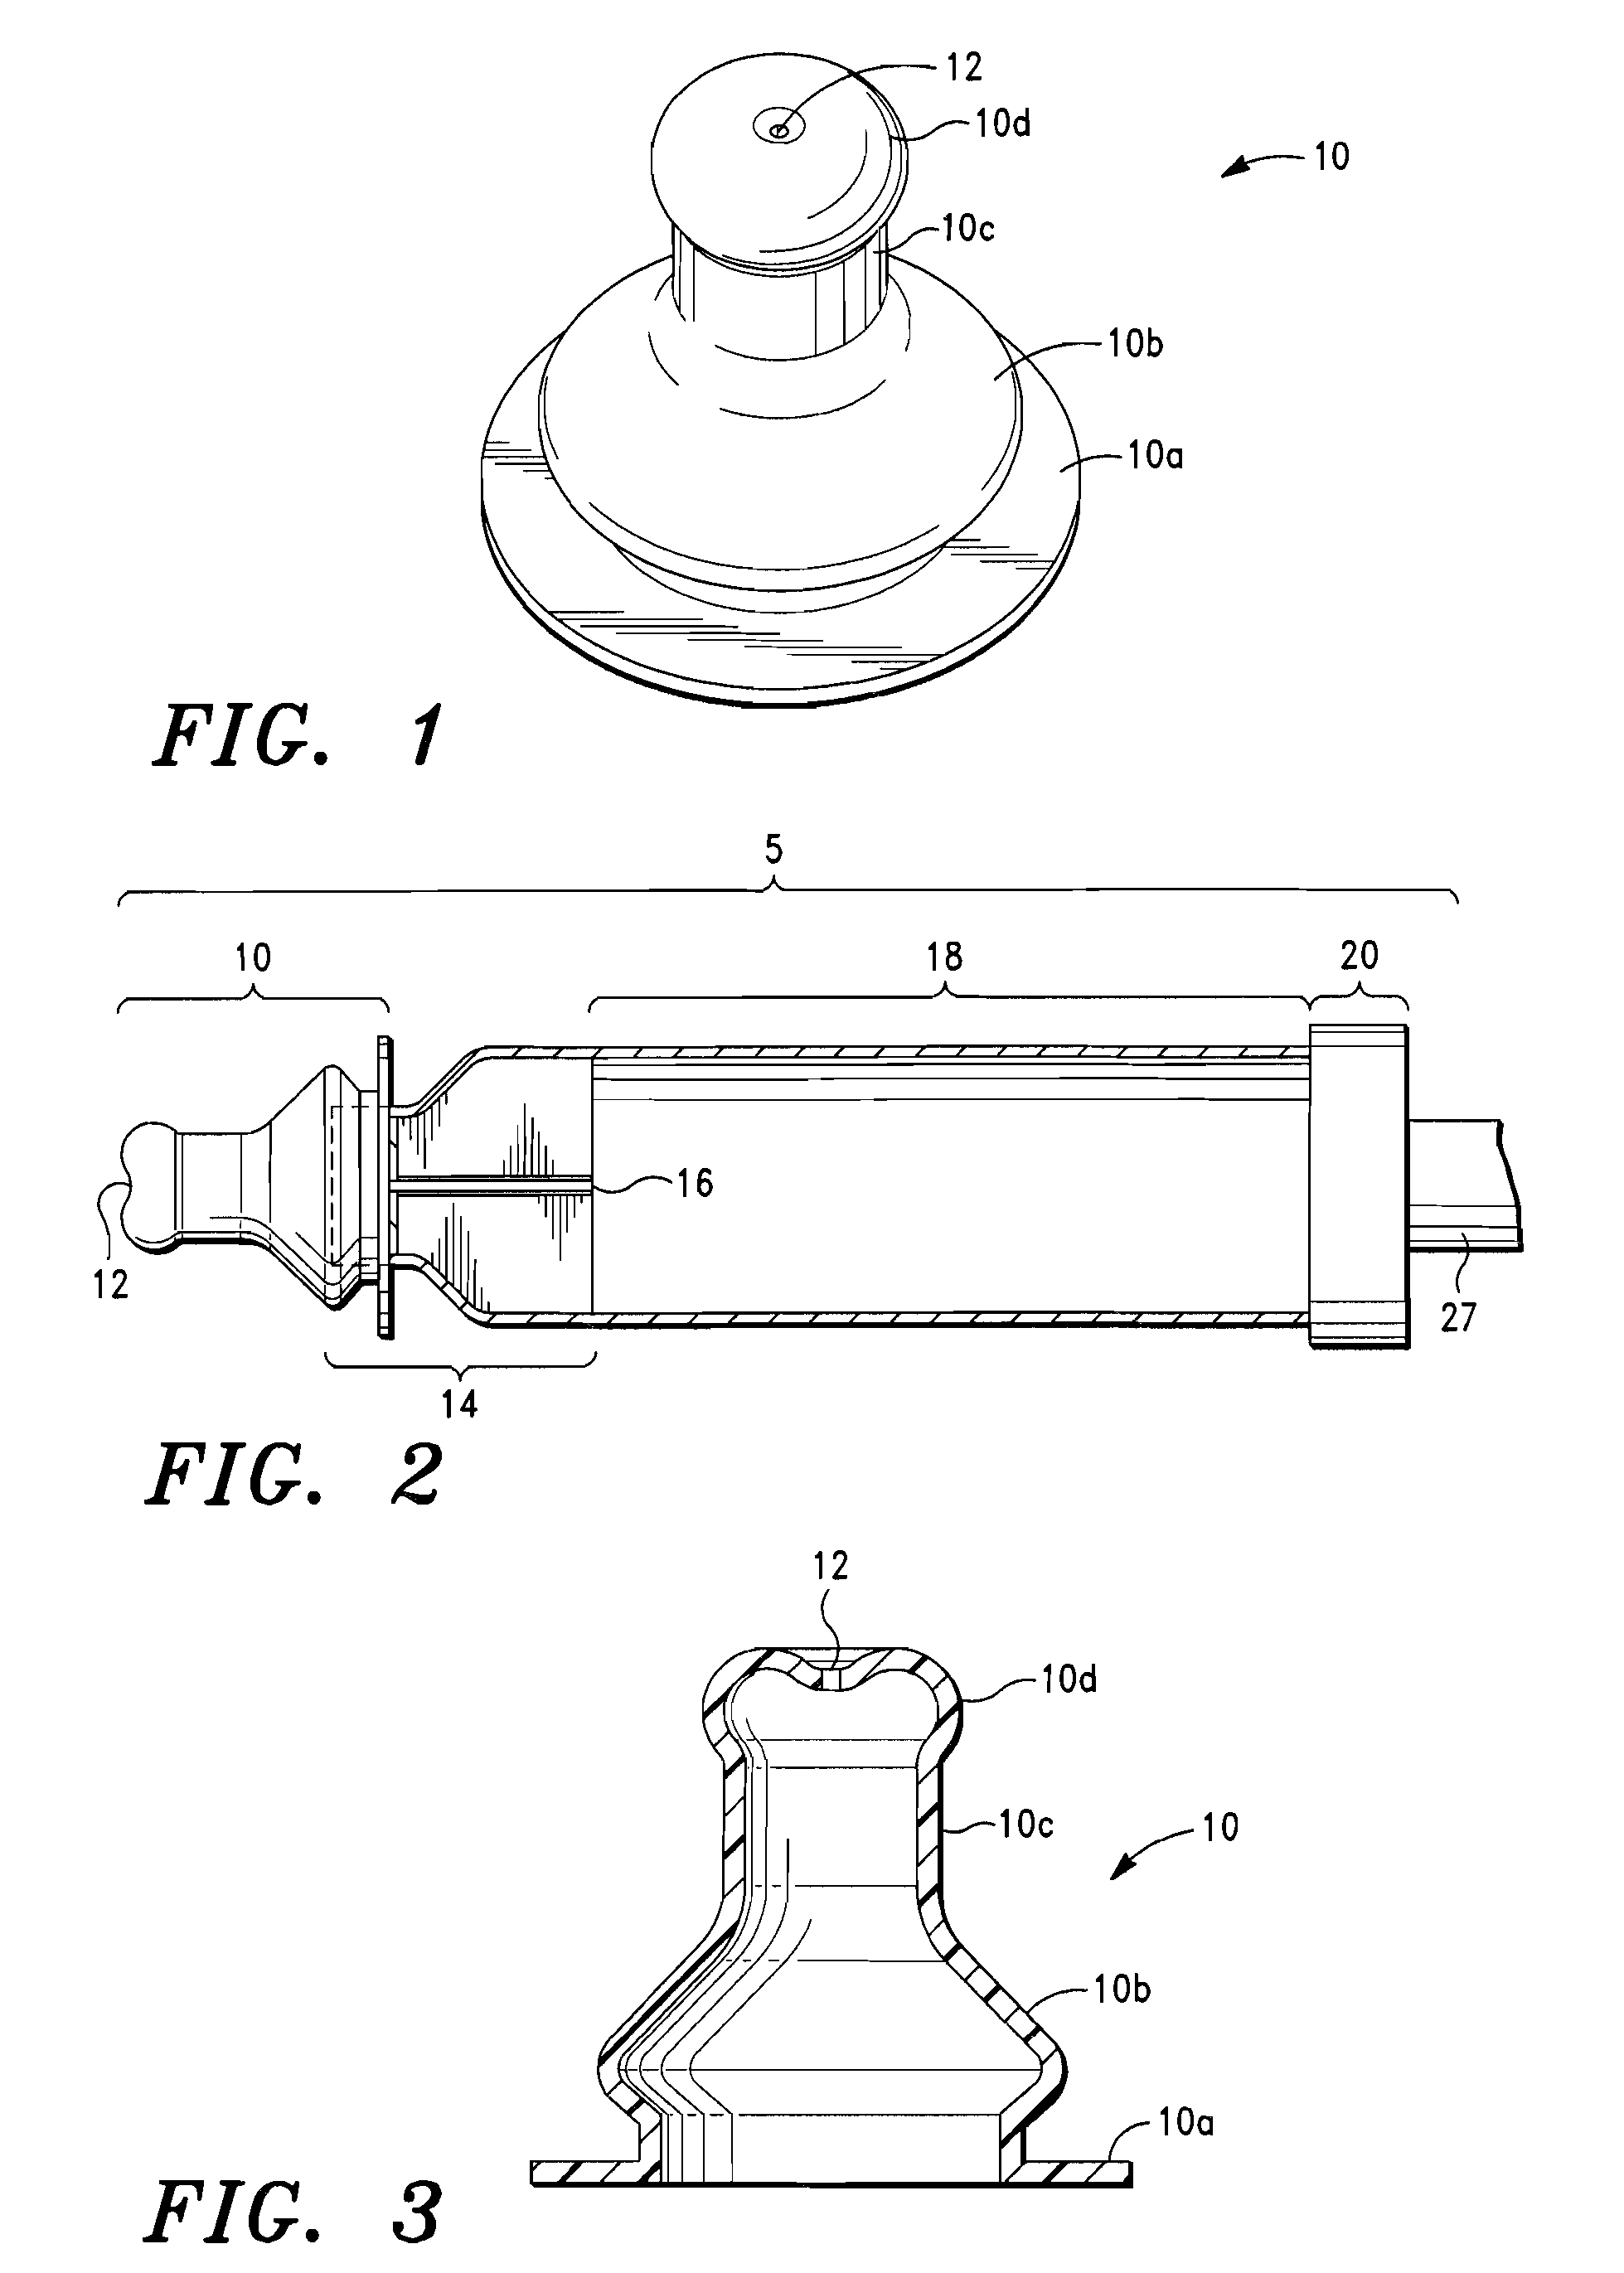 Mouthpiece and Flow Rate Controller for Intrapulmonary Delivery Devices